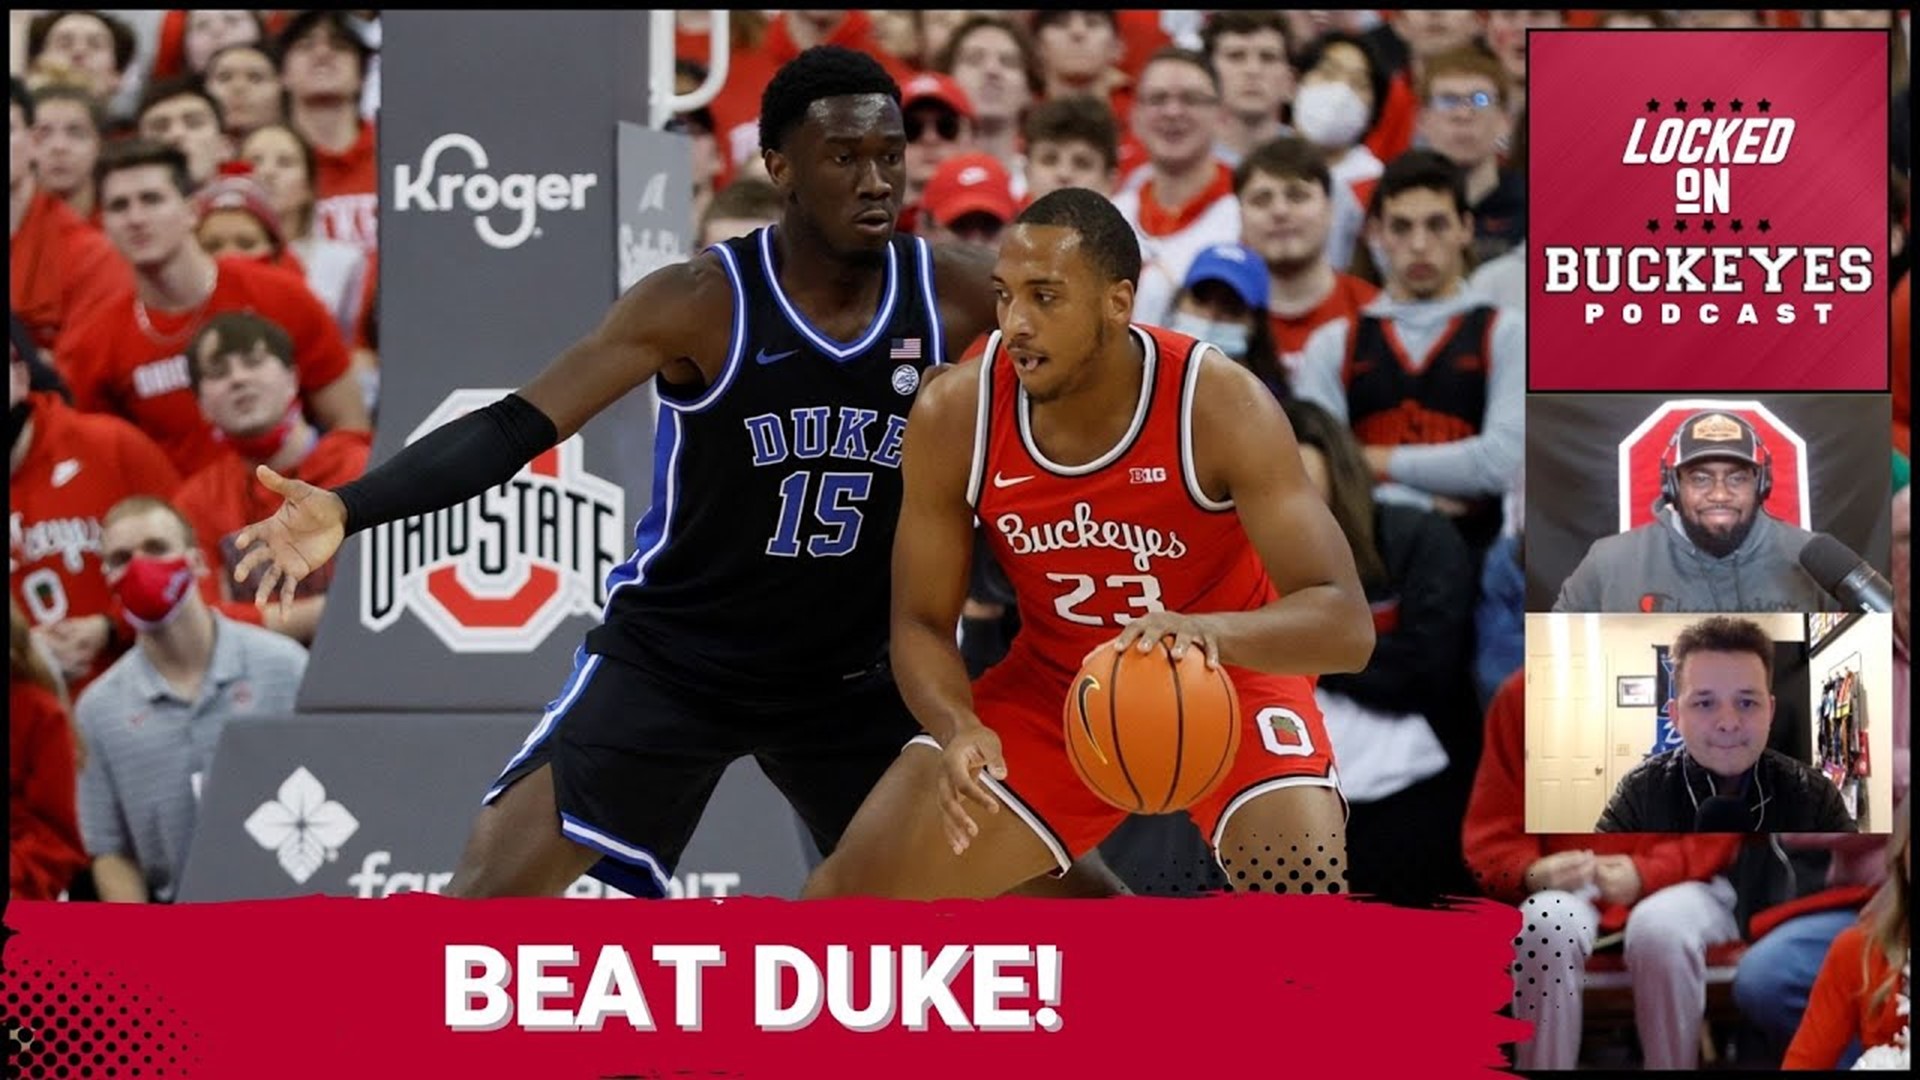 Turning to basketball, we take a look at Ohio State vs. the Duke Blue Devils in today’s Locked on Buckeyes podcast.